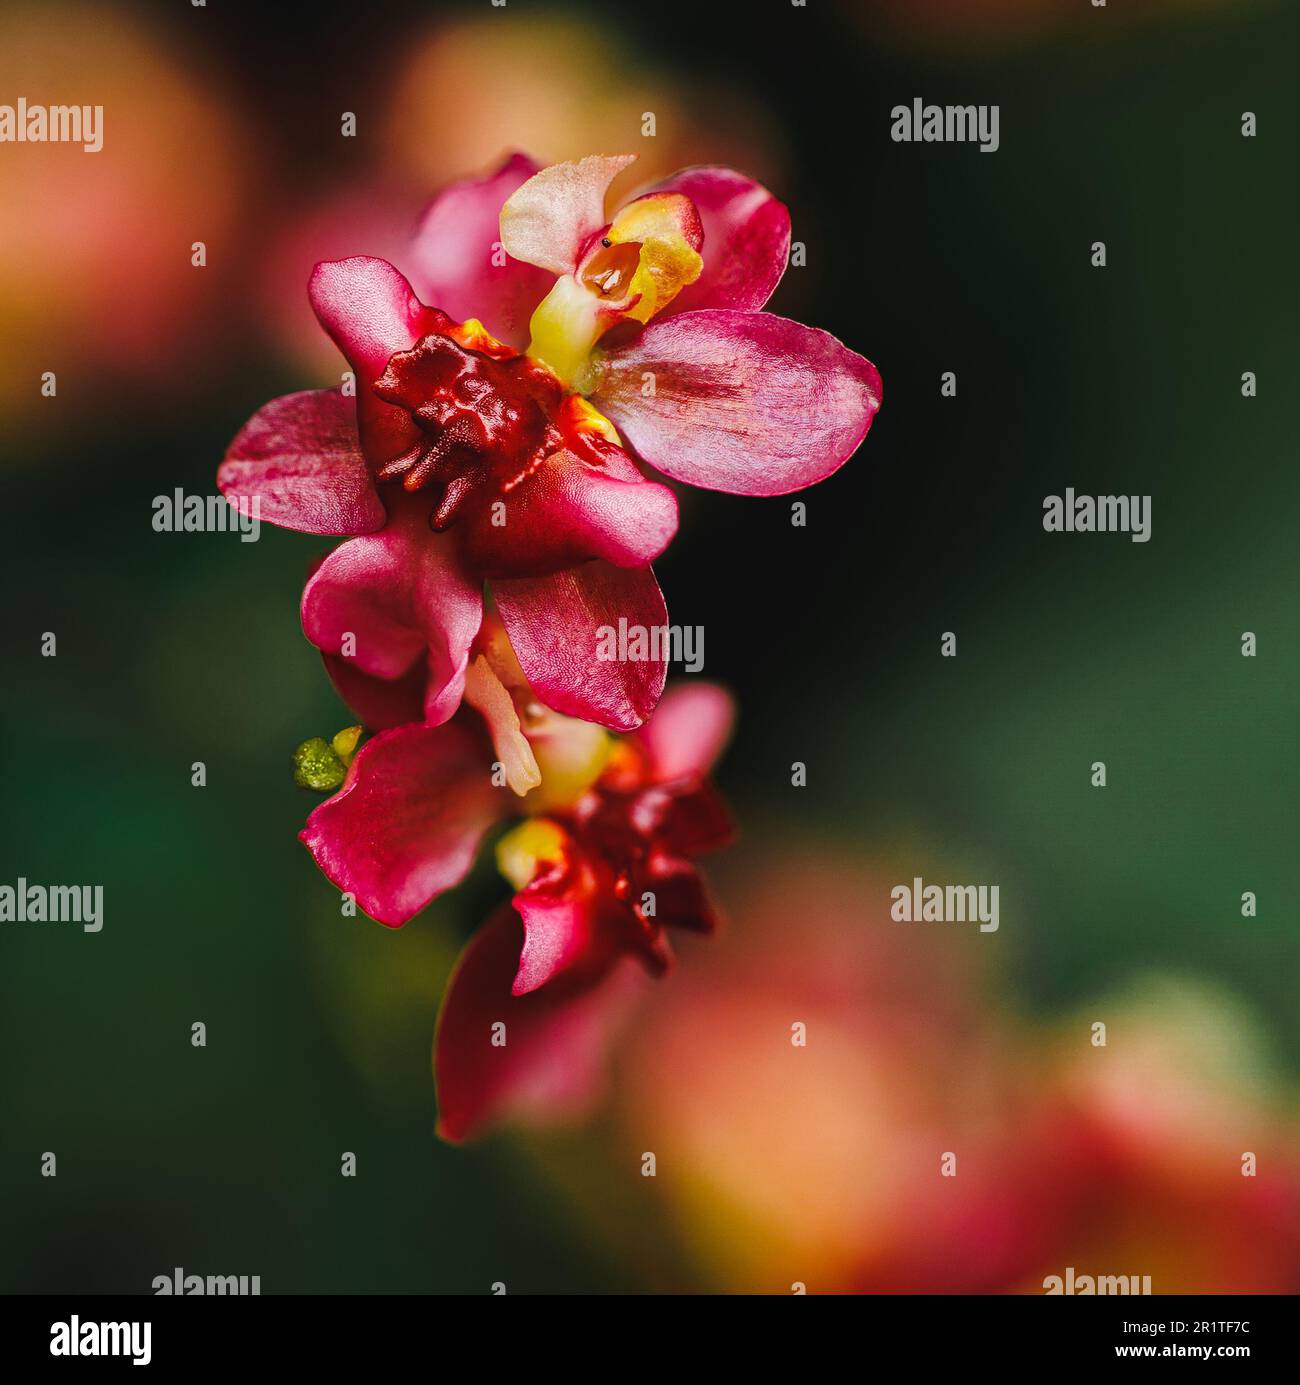 A vivid red dancing lady orchid illuminated in the center of the frame Stock Photo